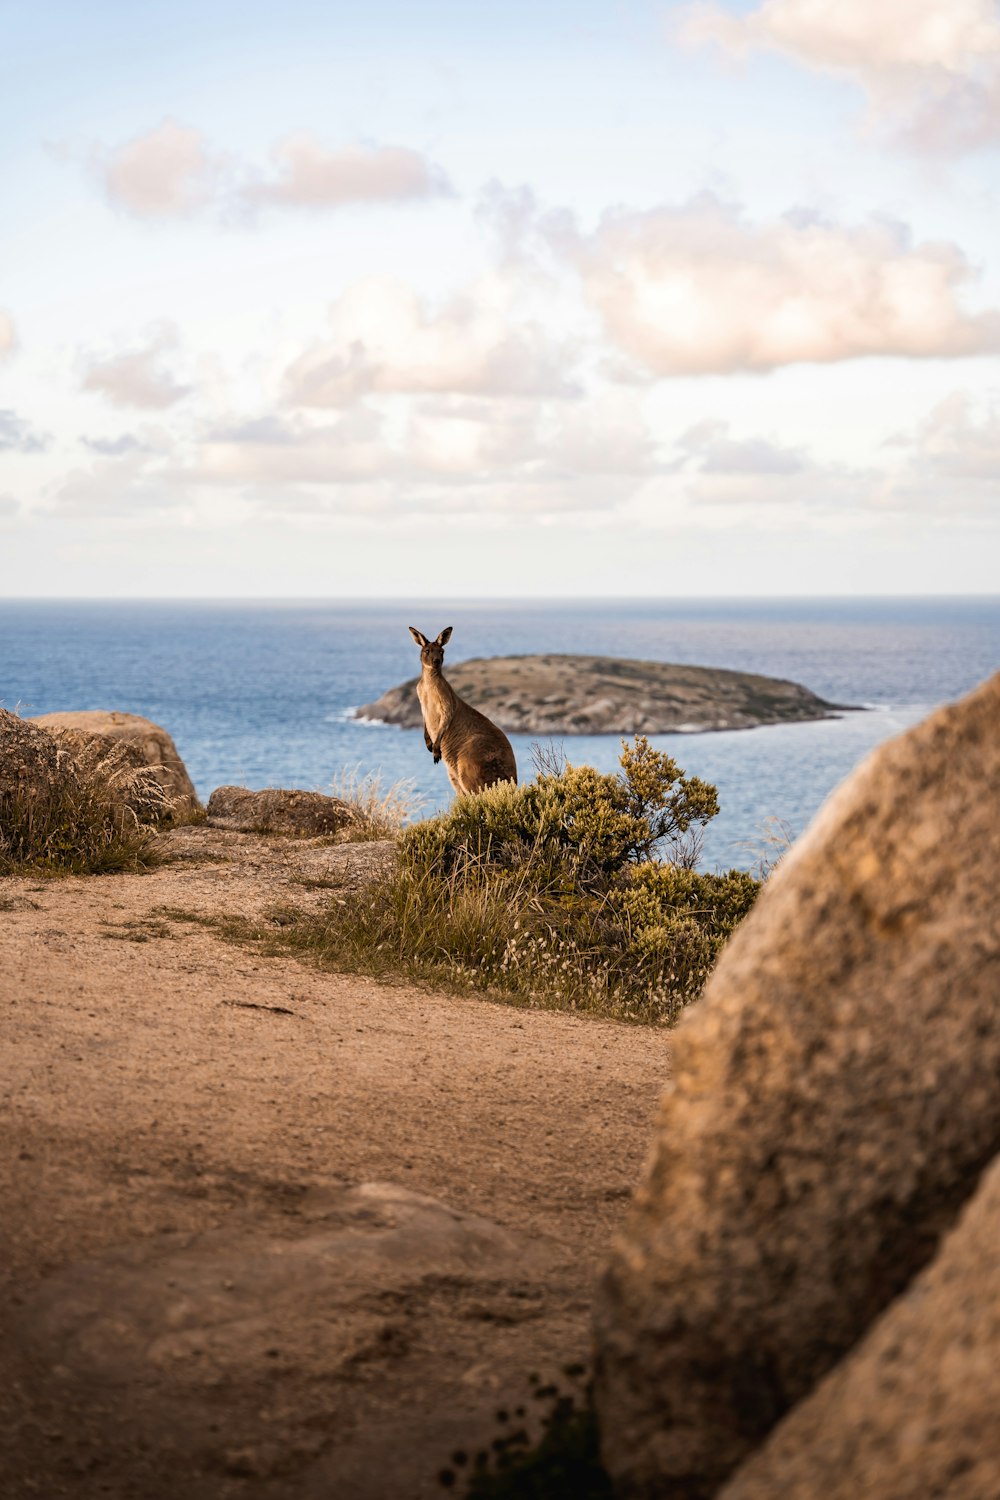 a kangaroo standing on top of a dirt field next to the ocean